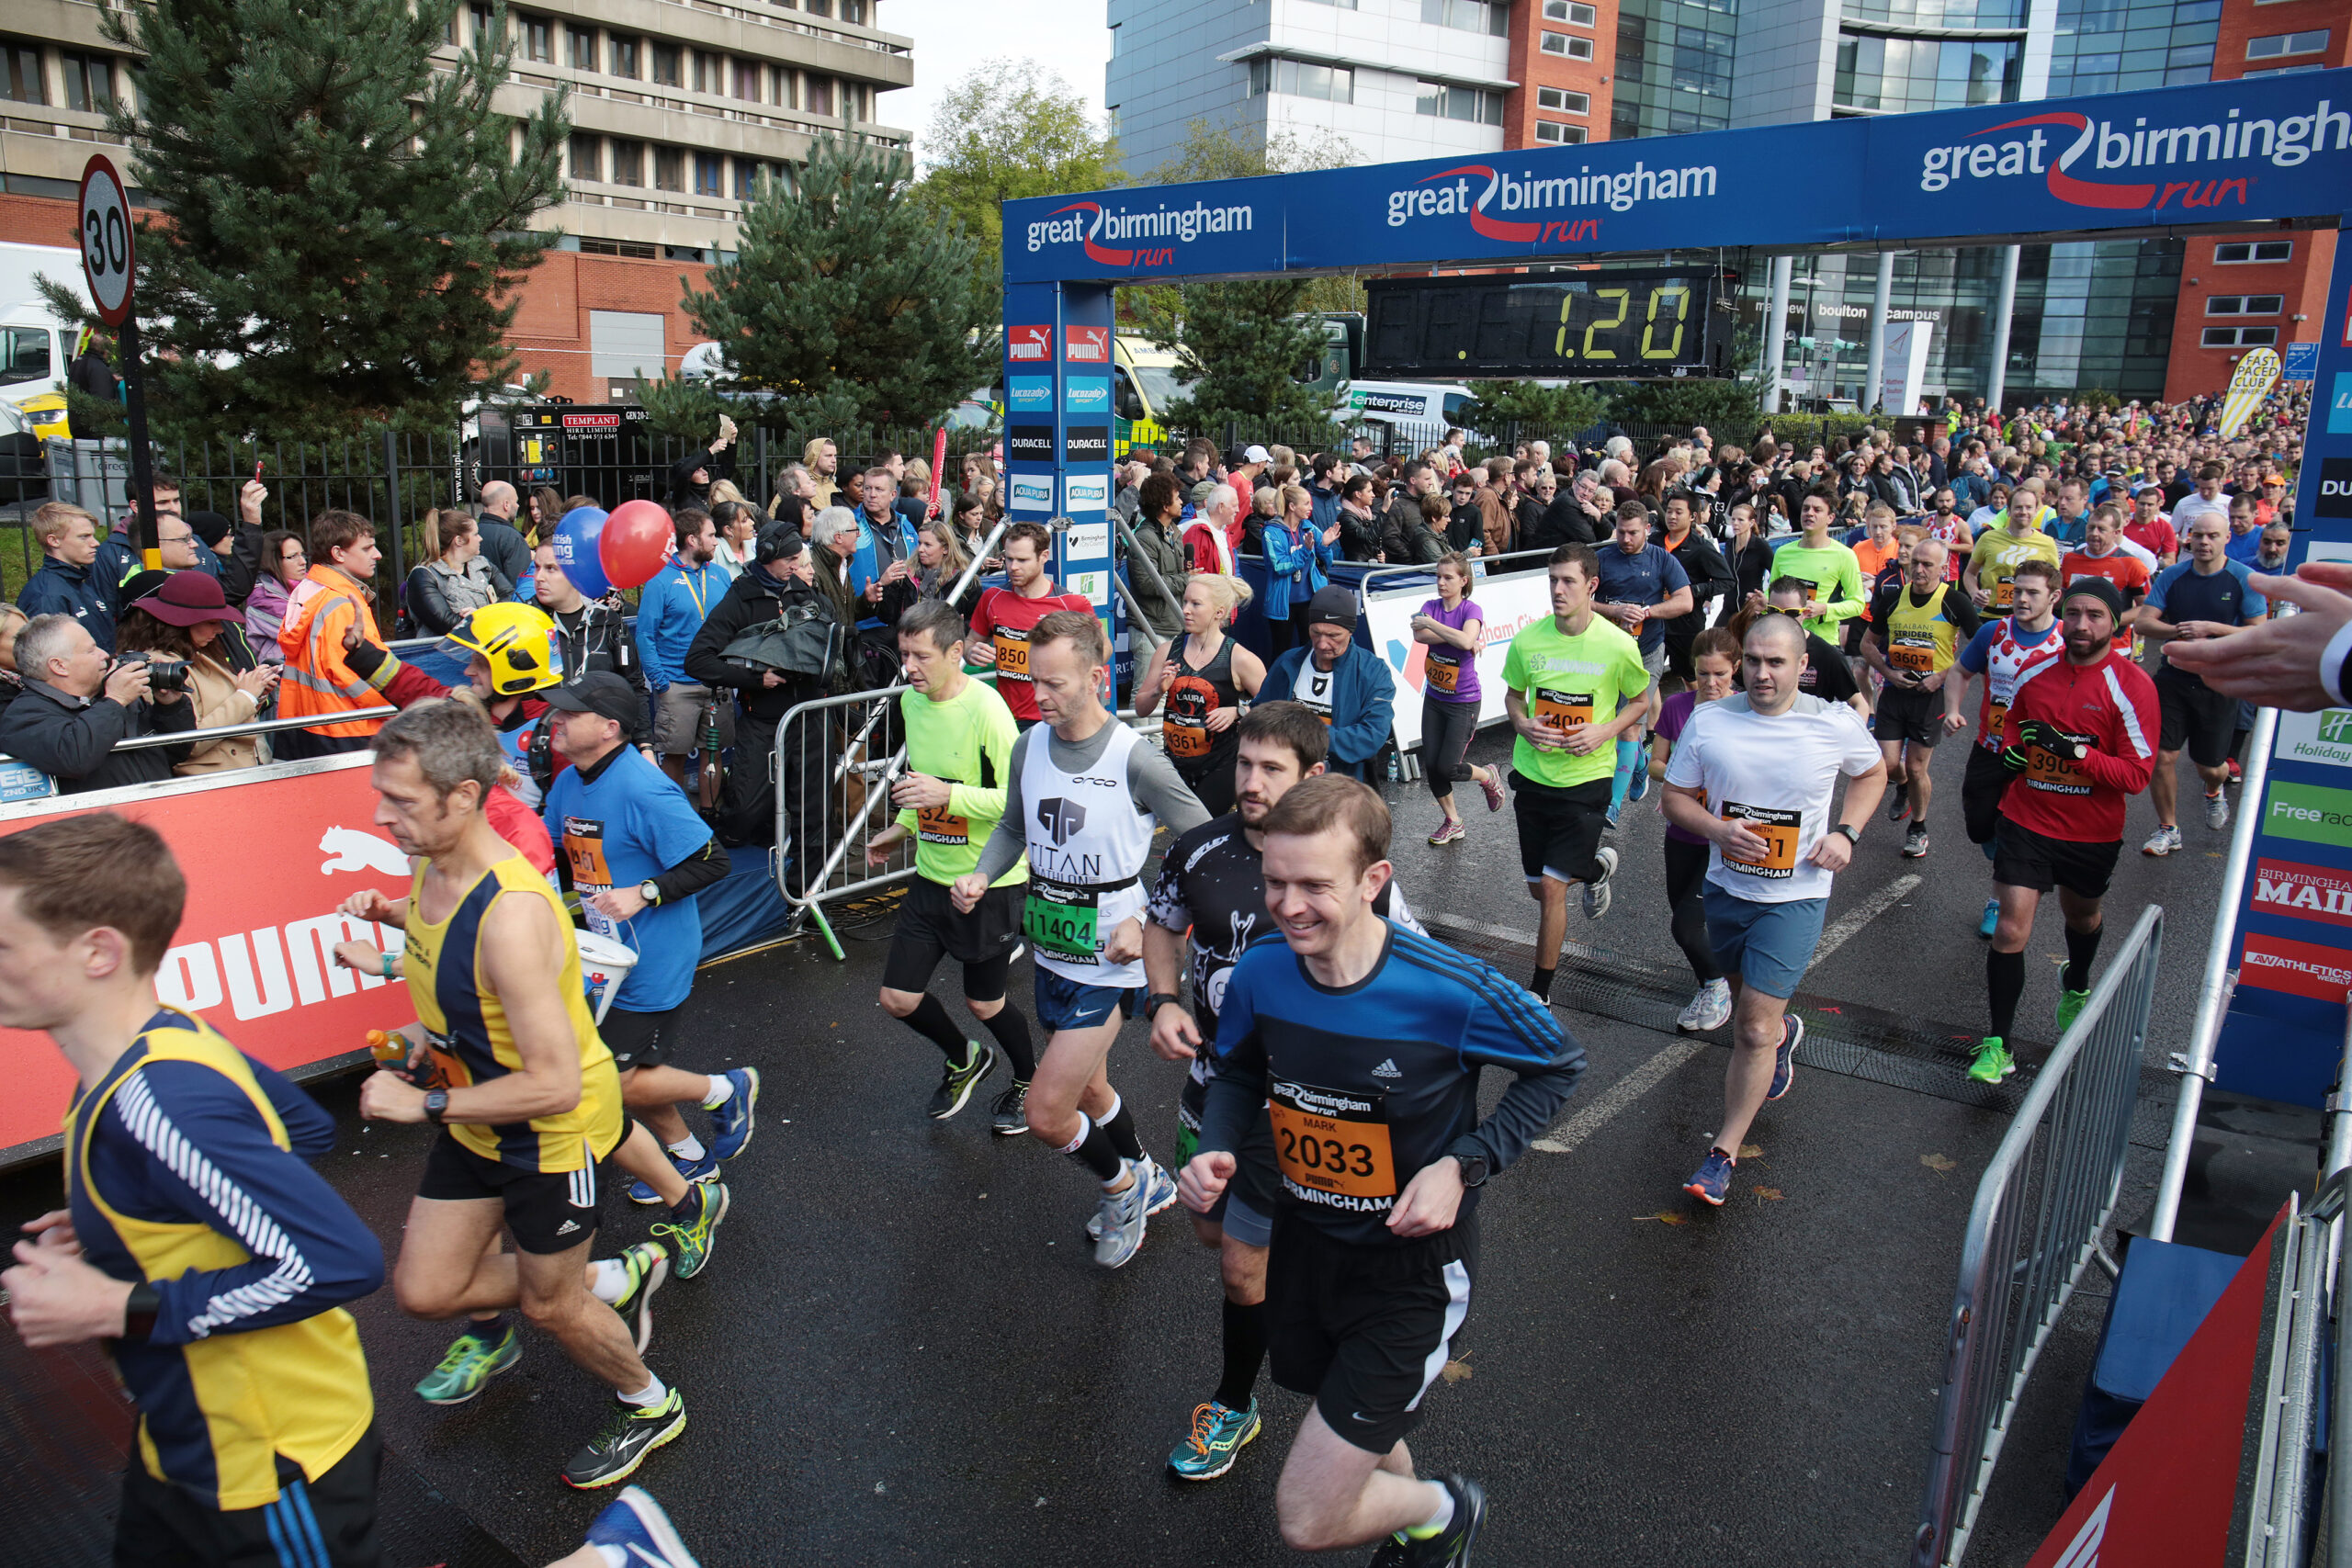 People running with the text of Great Birmingham run in the background